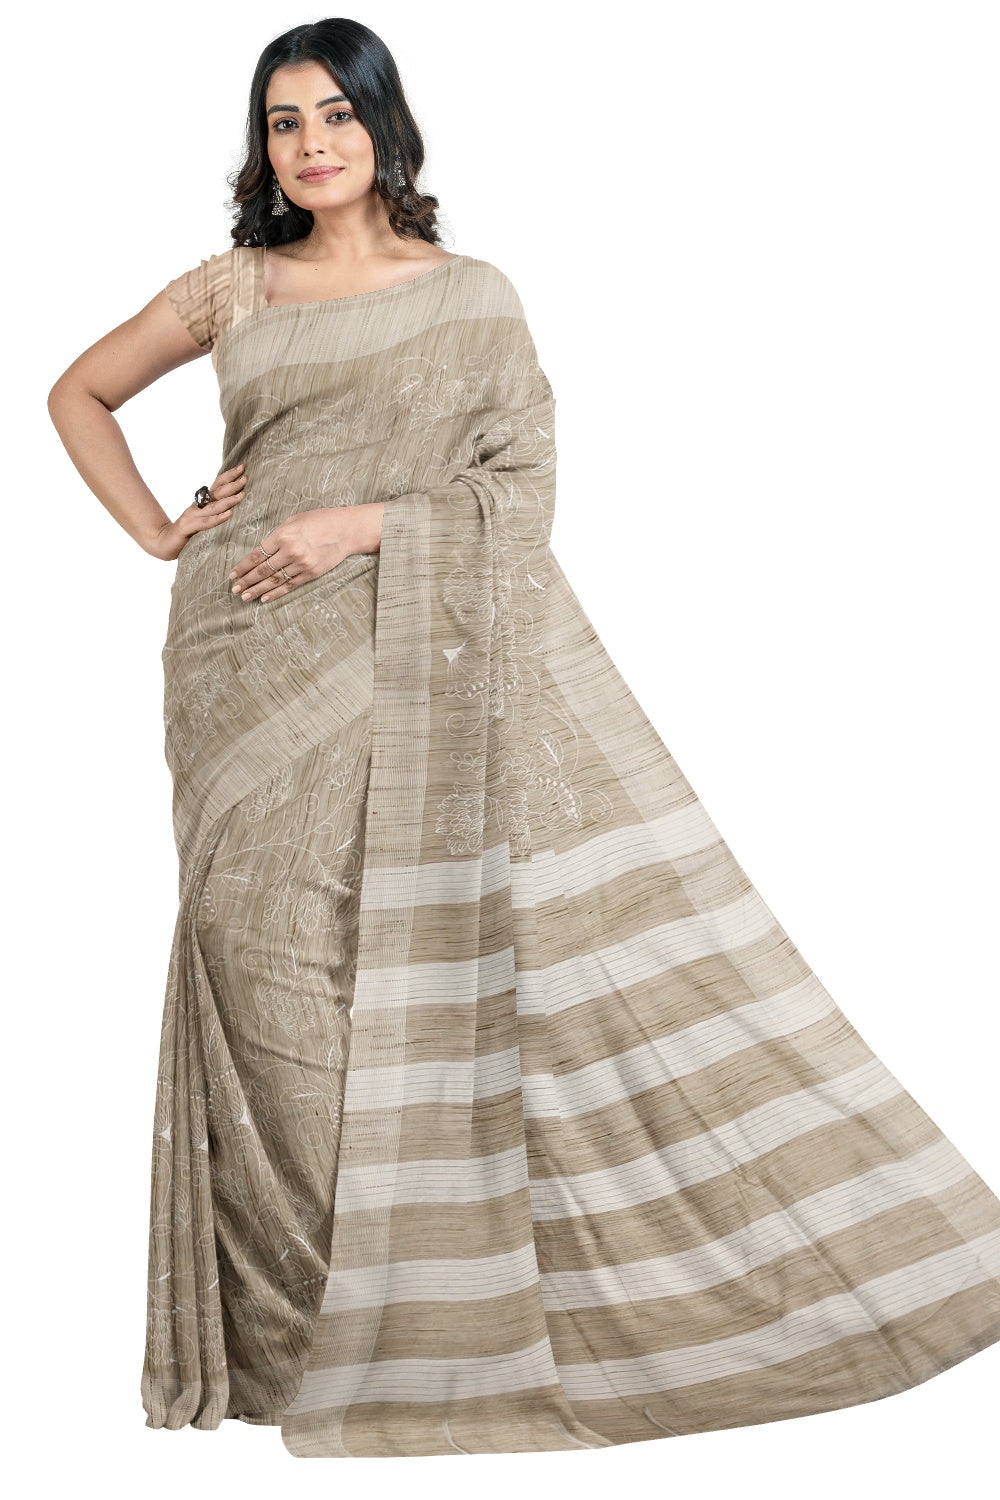 Southloom Cotton Grey Designer Saree with Embroidery Work